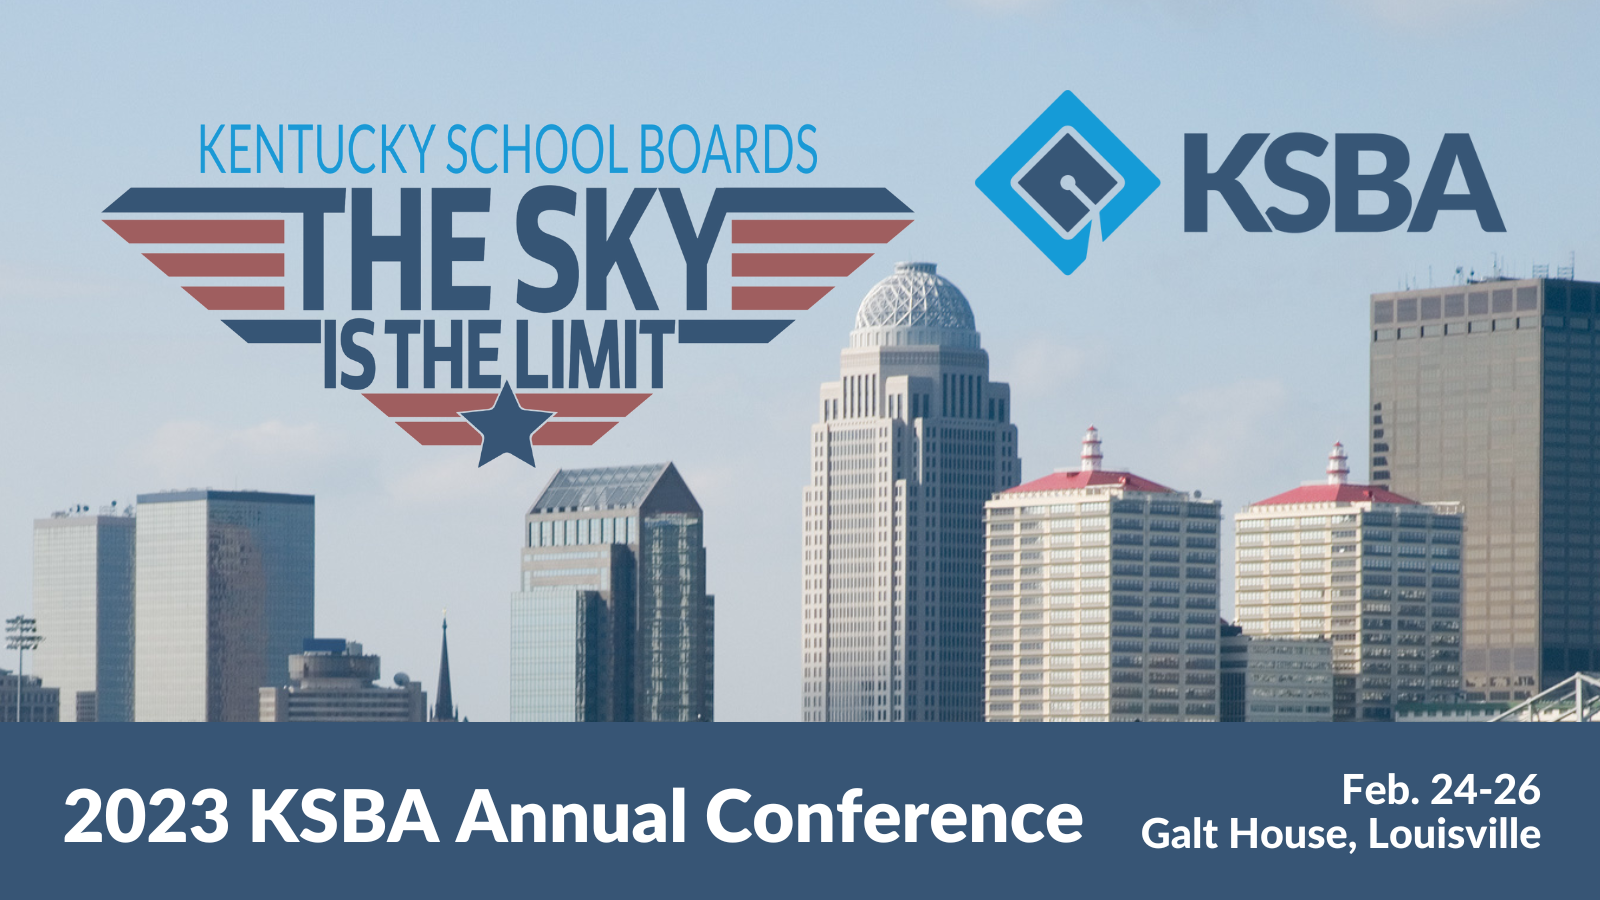 2023 KSBA Annual Conference